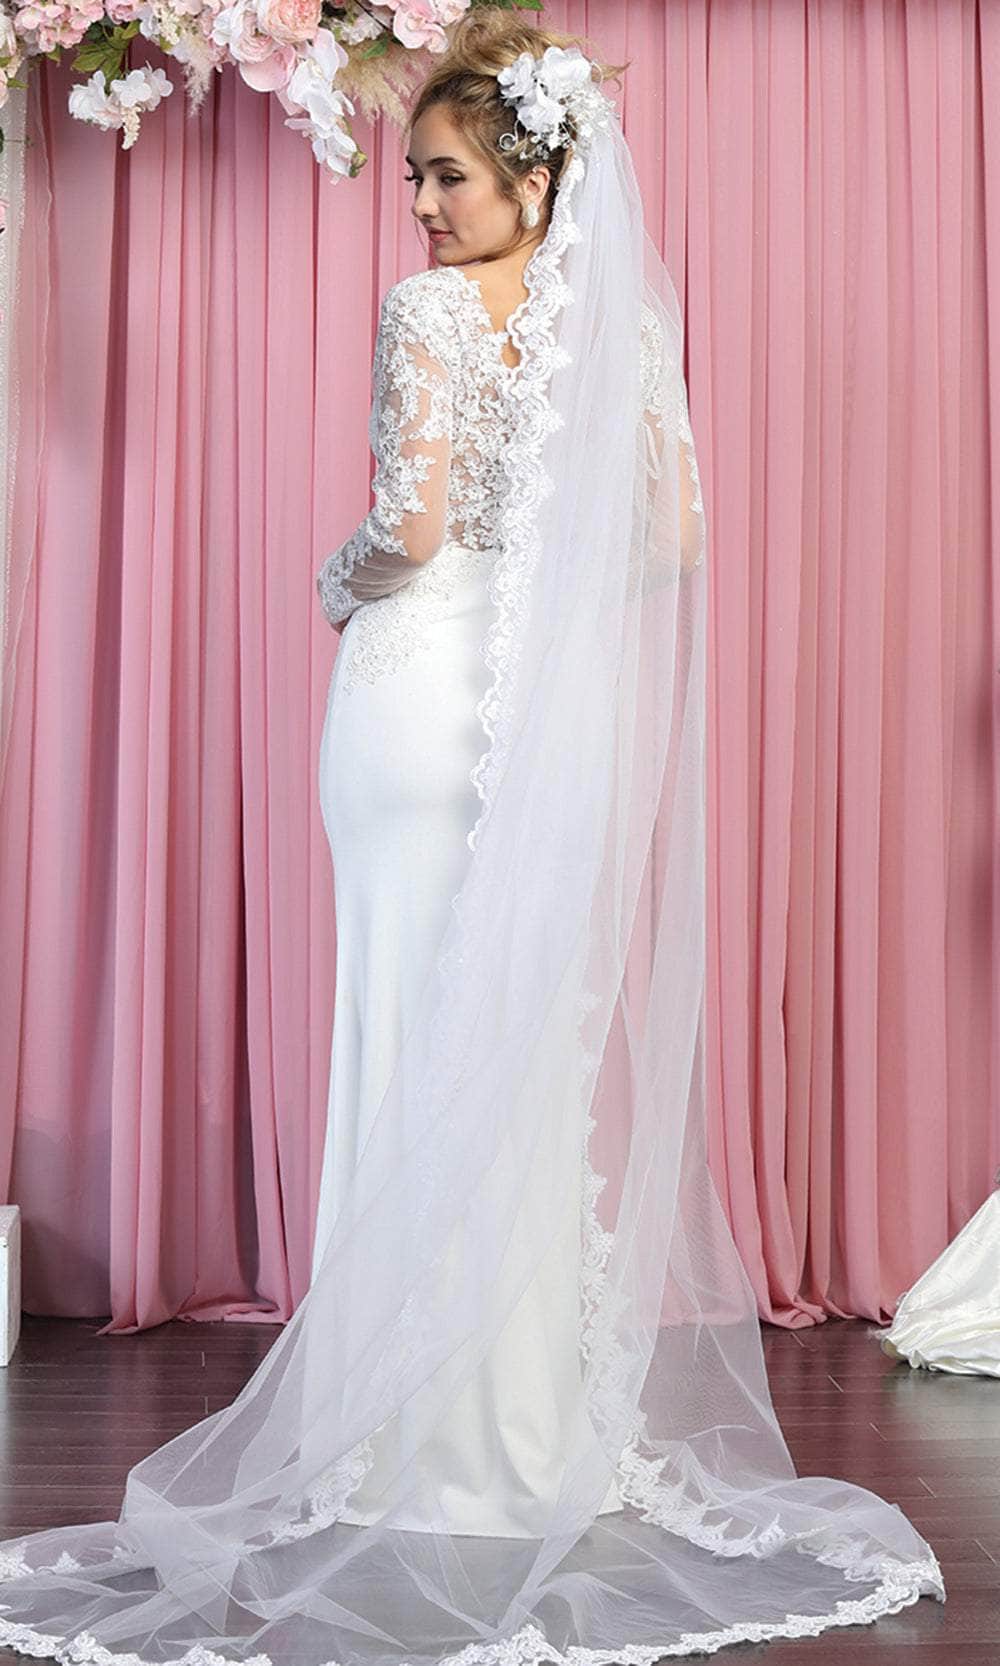 May Queen RQ7901 - Long Sleeves Low-cut V-neck Wedding Gown Bridal Dresses